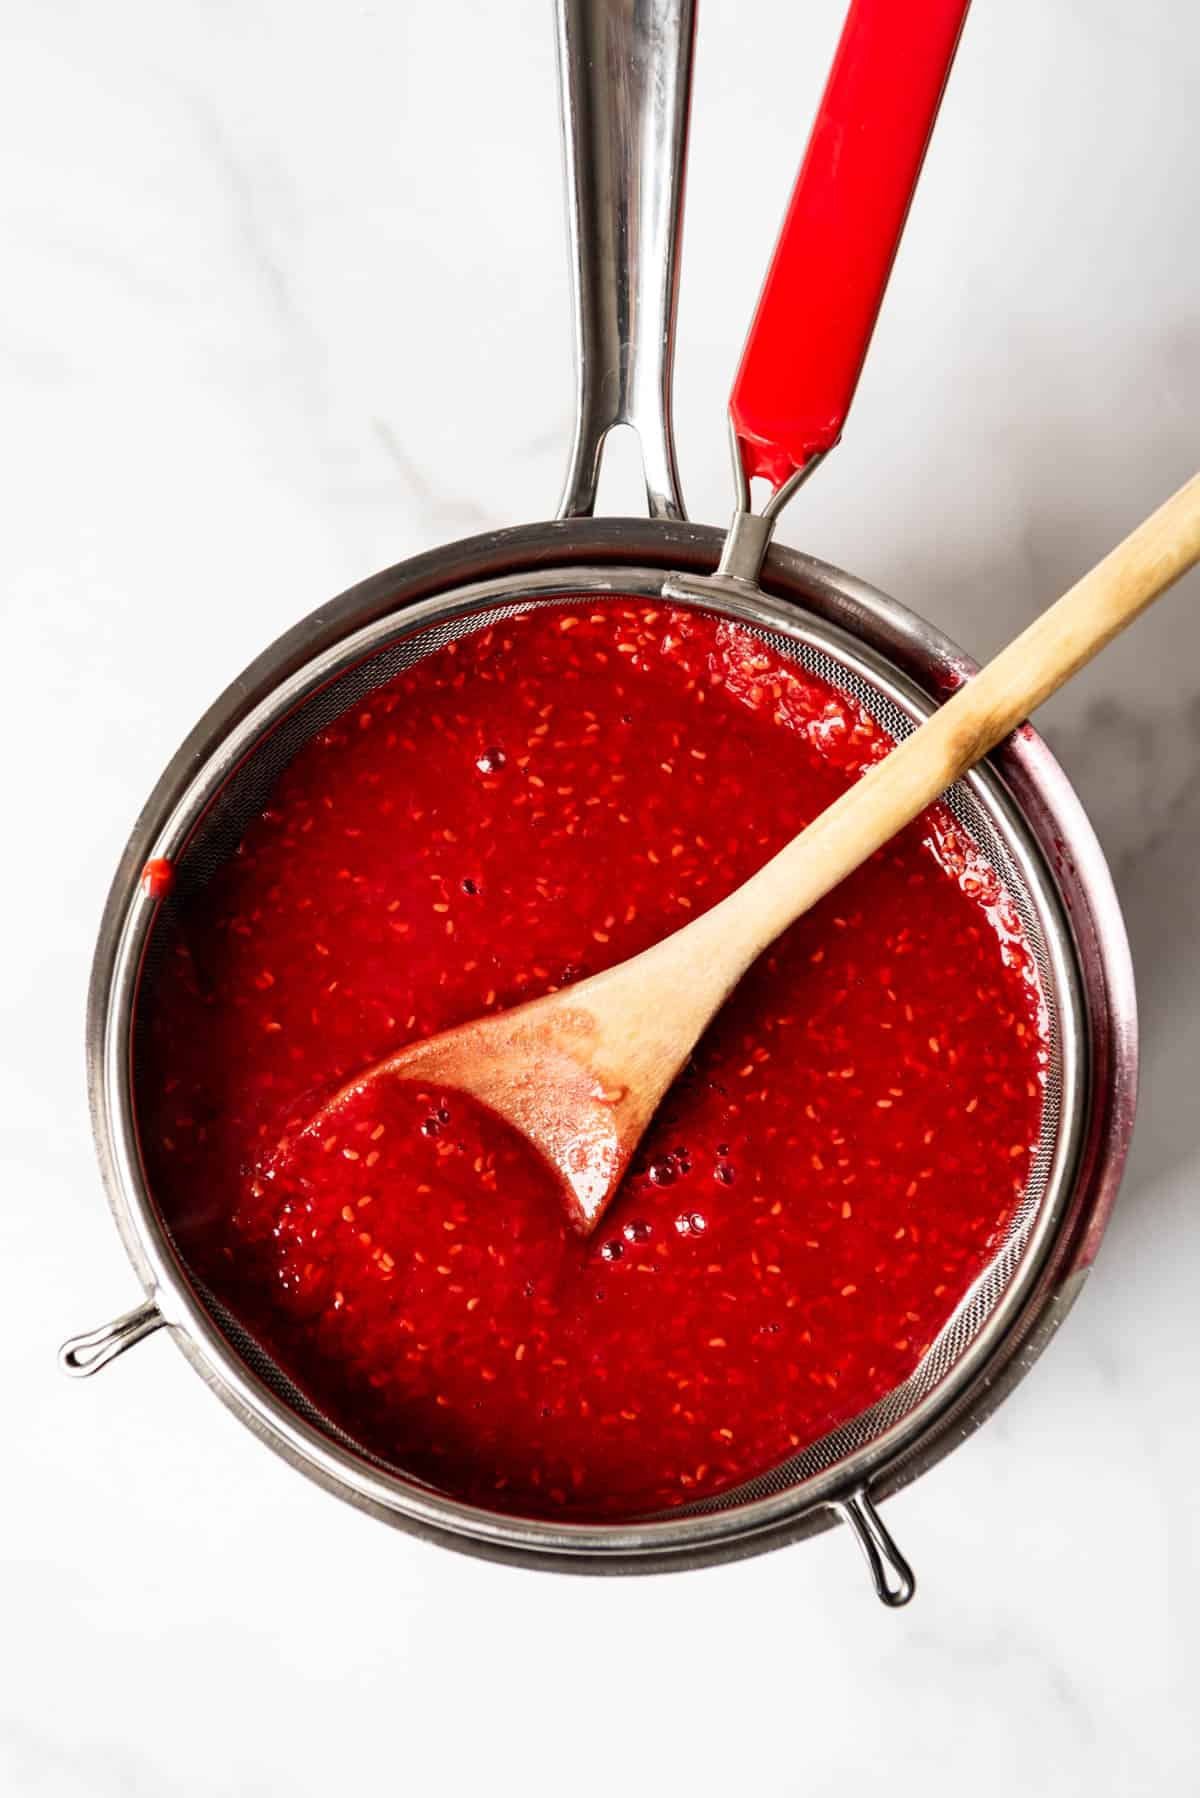 An image of pureed raspberries and sugar being pushed through a fine mesh strainer.